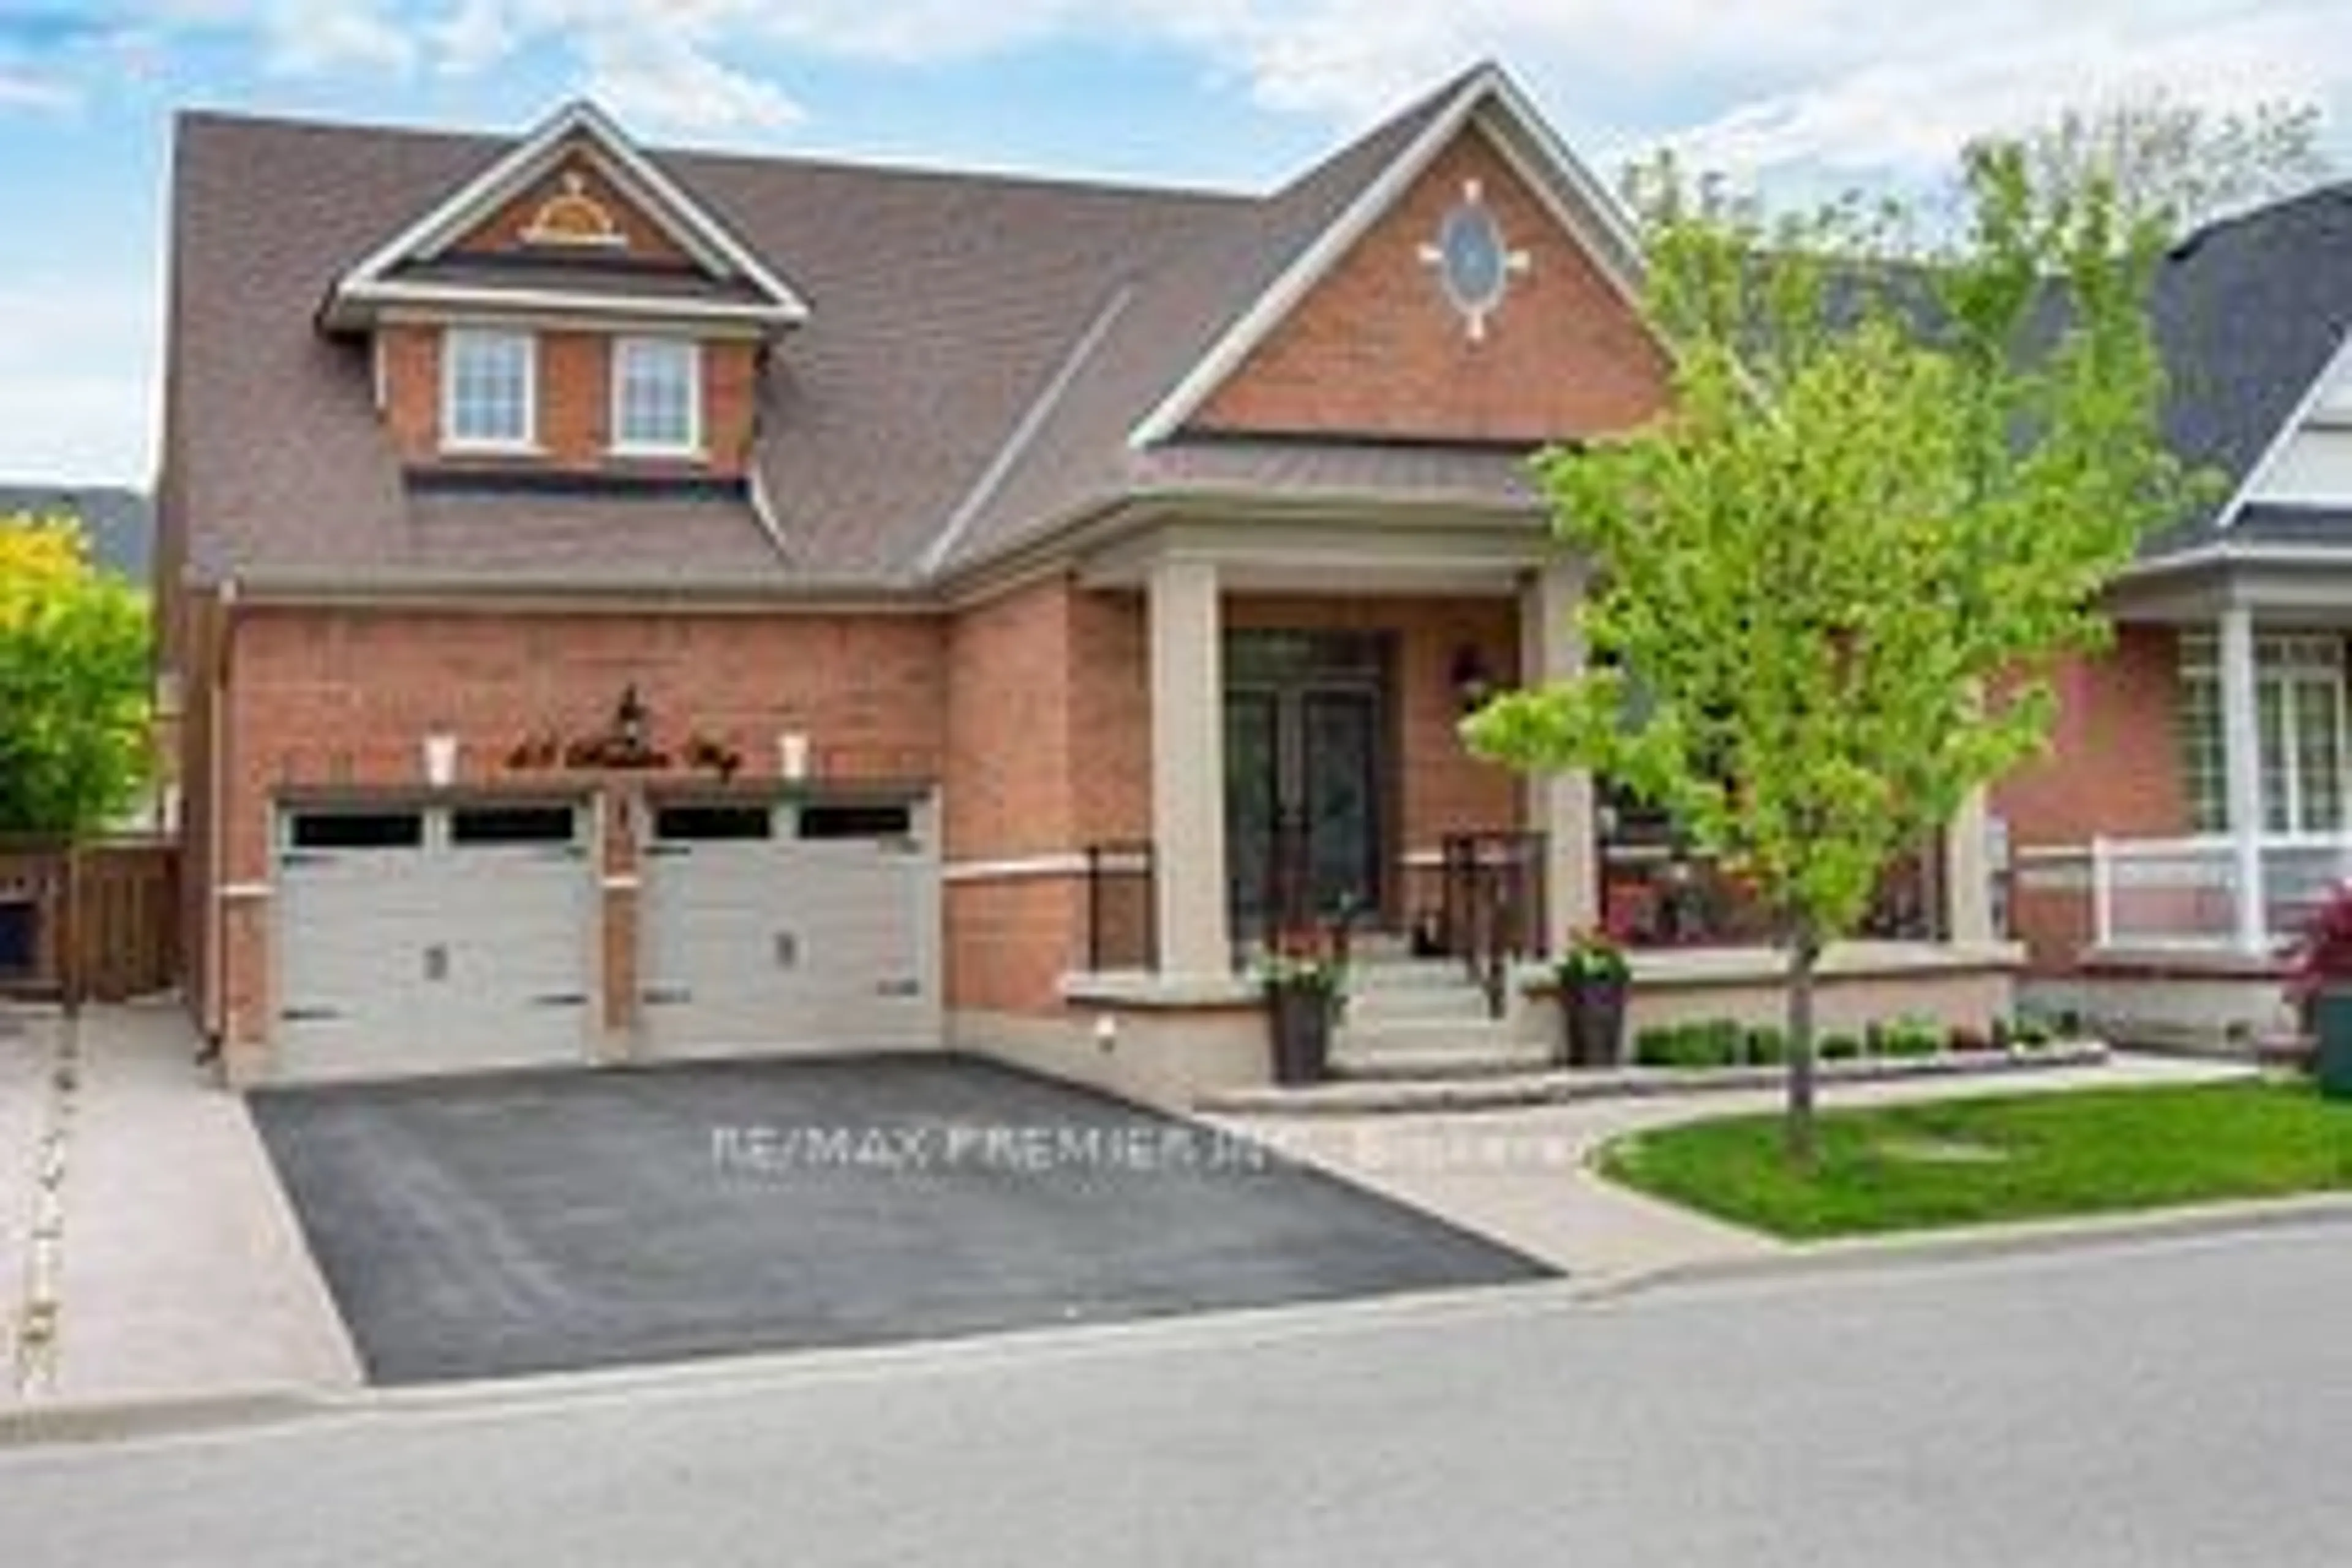 Home with brick exterior material for 48 Braden Way, Vaughan Ontario L4H 2W6